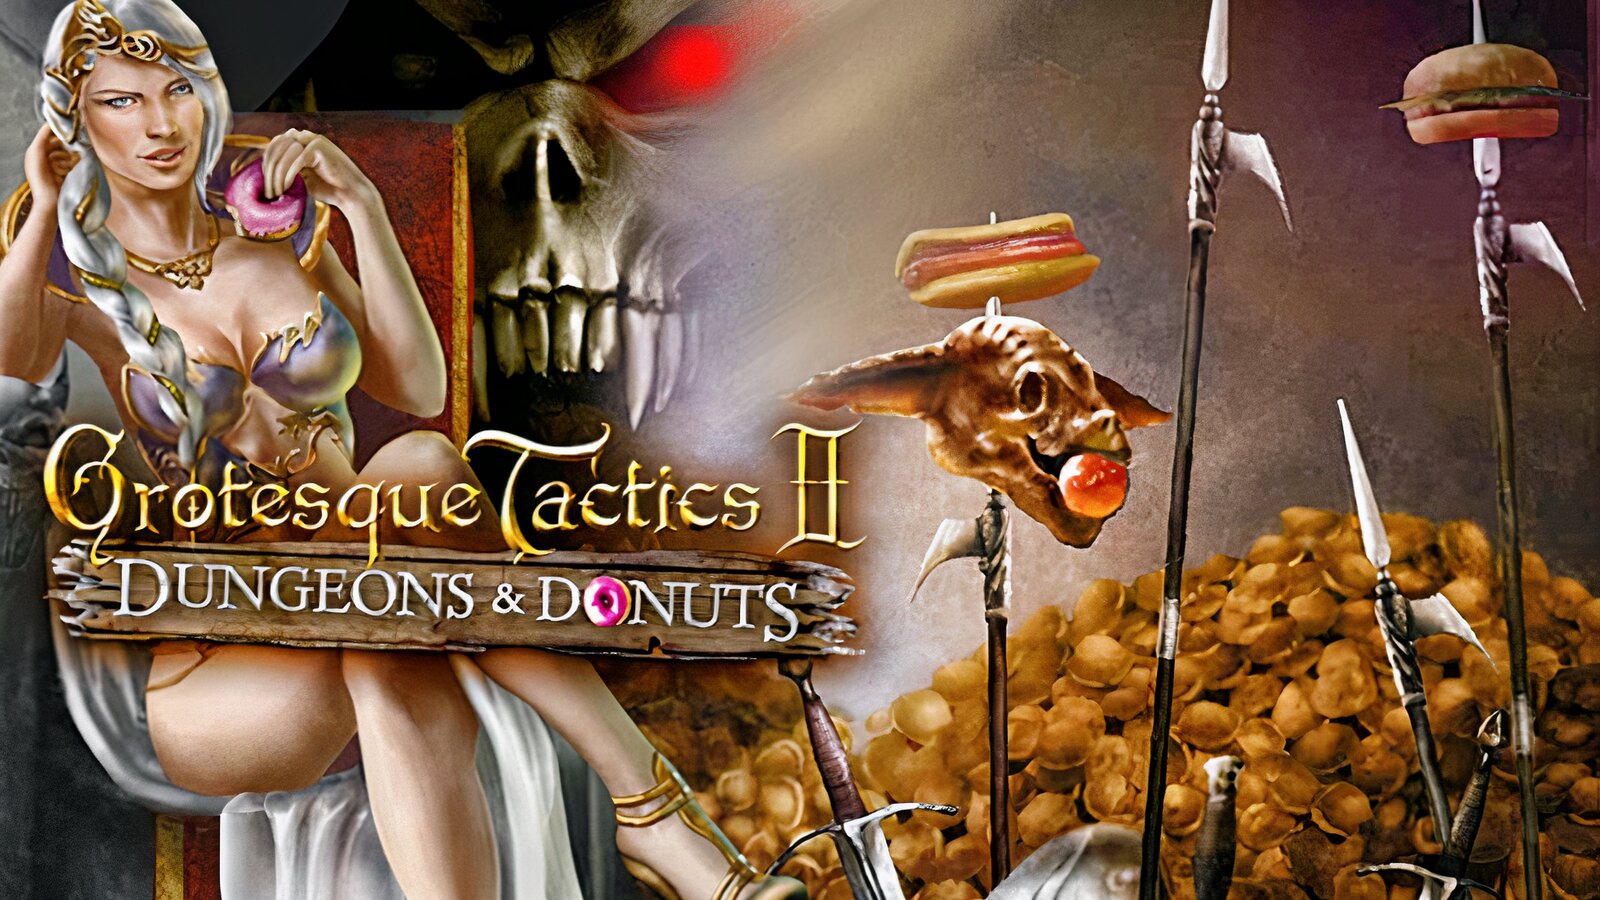 Grotesque Tactics 2 - Dungeons and Donuts